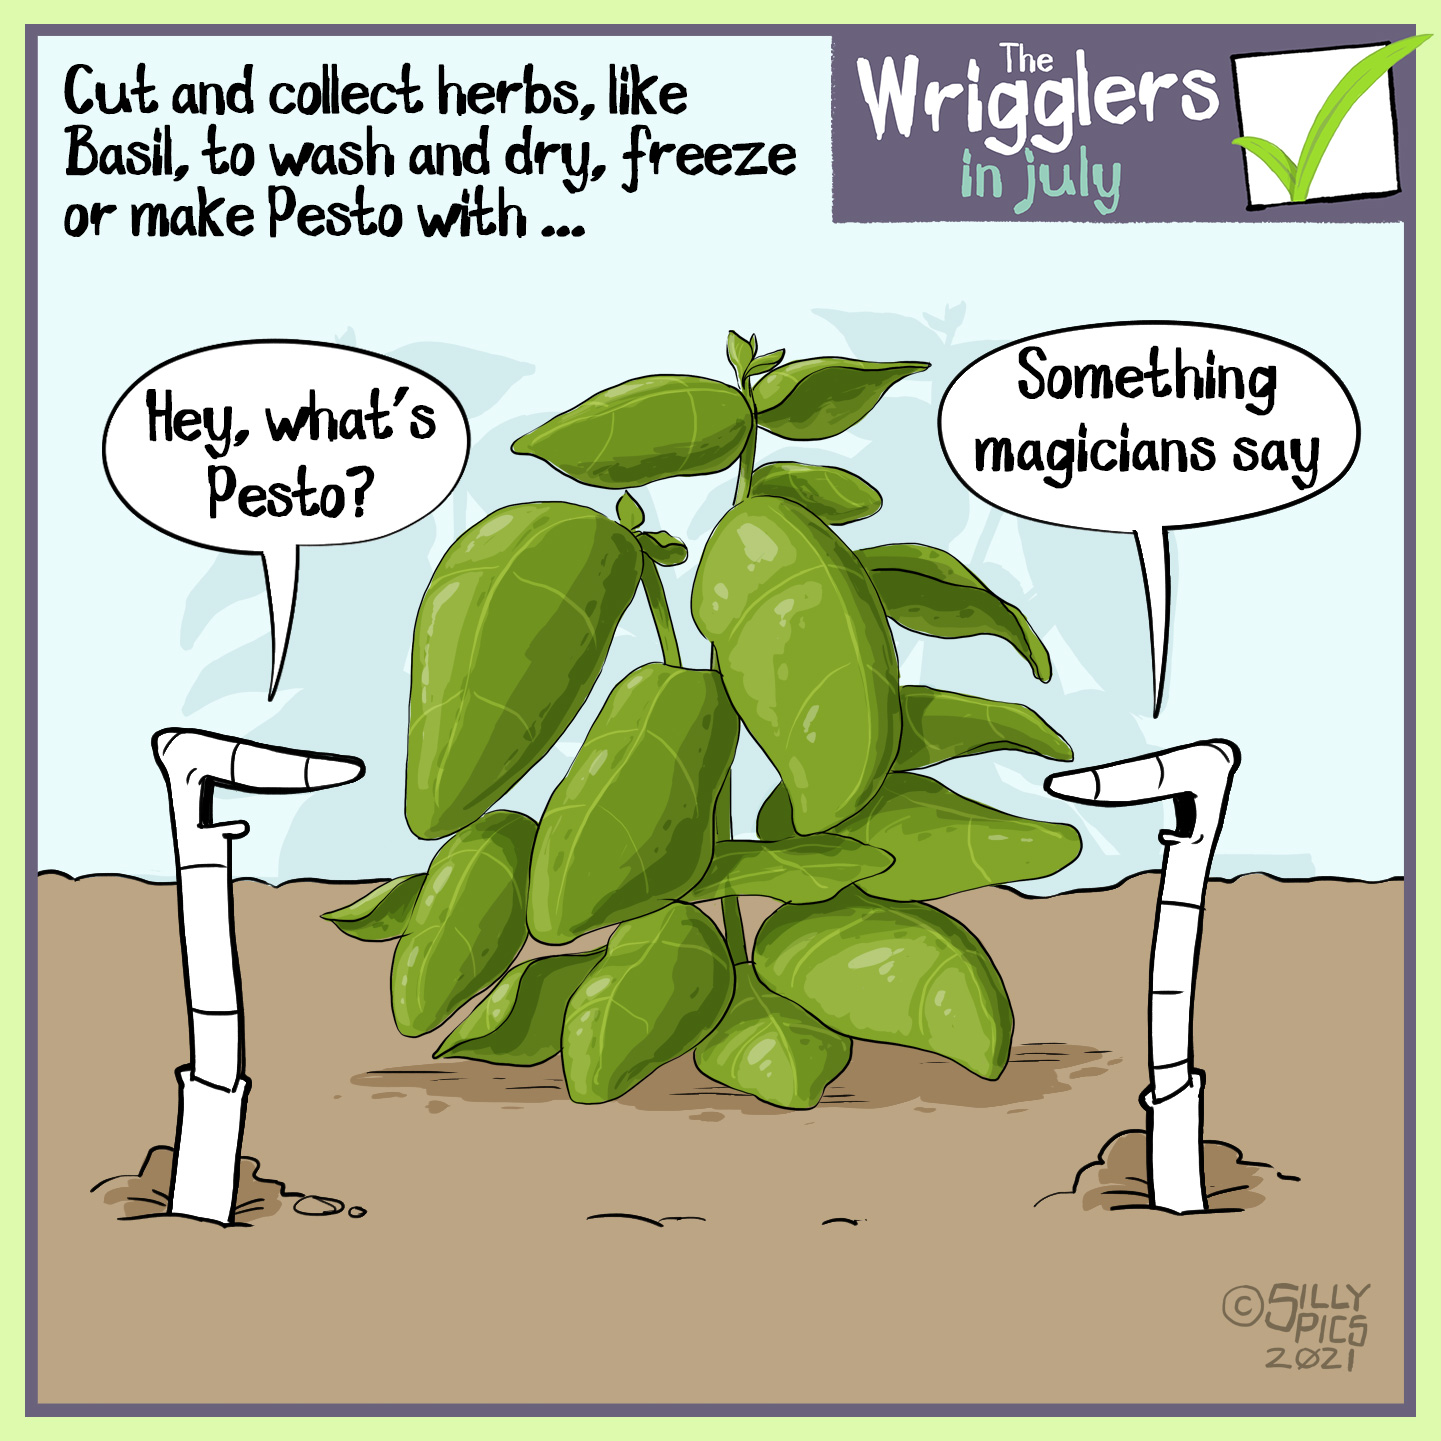 Cut and collect herbs, like Basil, to wash and dry, store in the freezer or make pesto with this month … Two worms are looking at a Basil plant, one worm says, “ Hey, what’s Pesto? …” The other worm says, “Something magicians say”